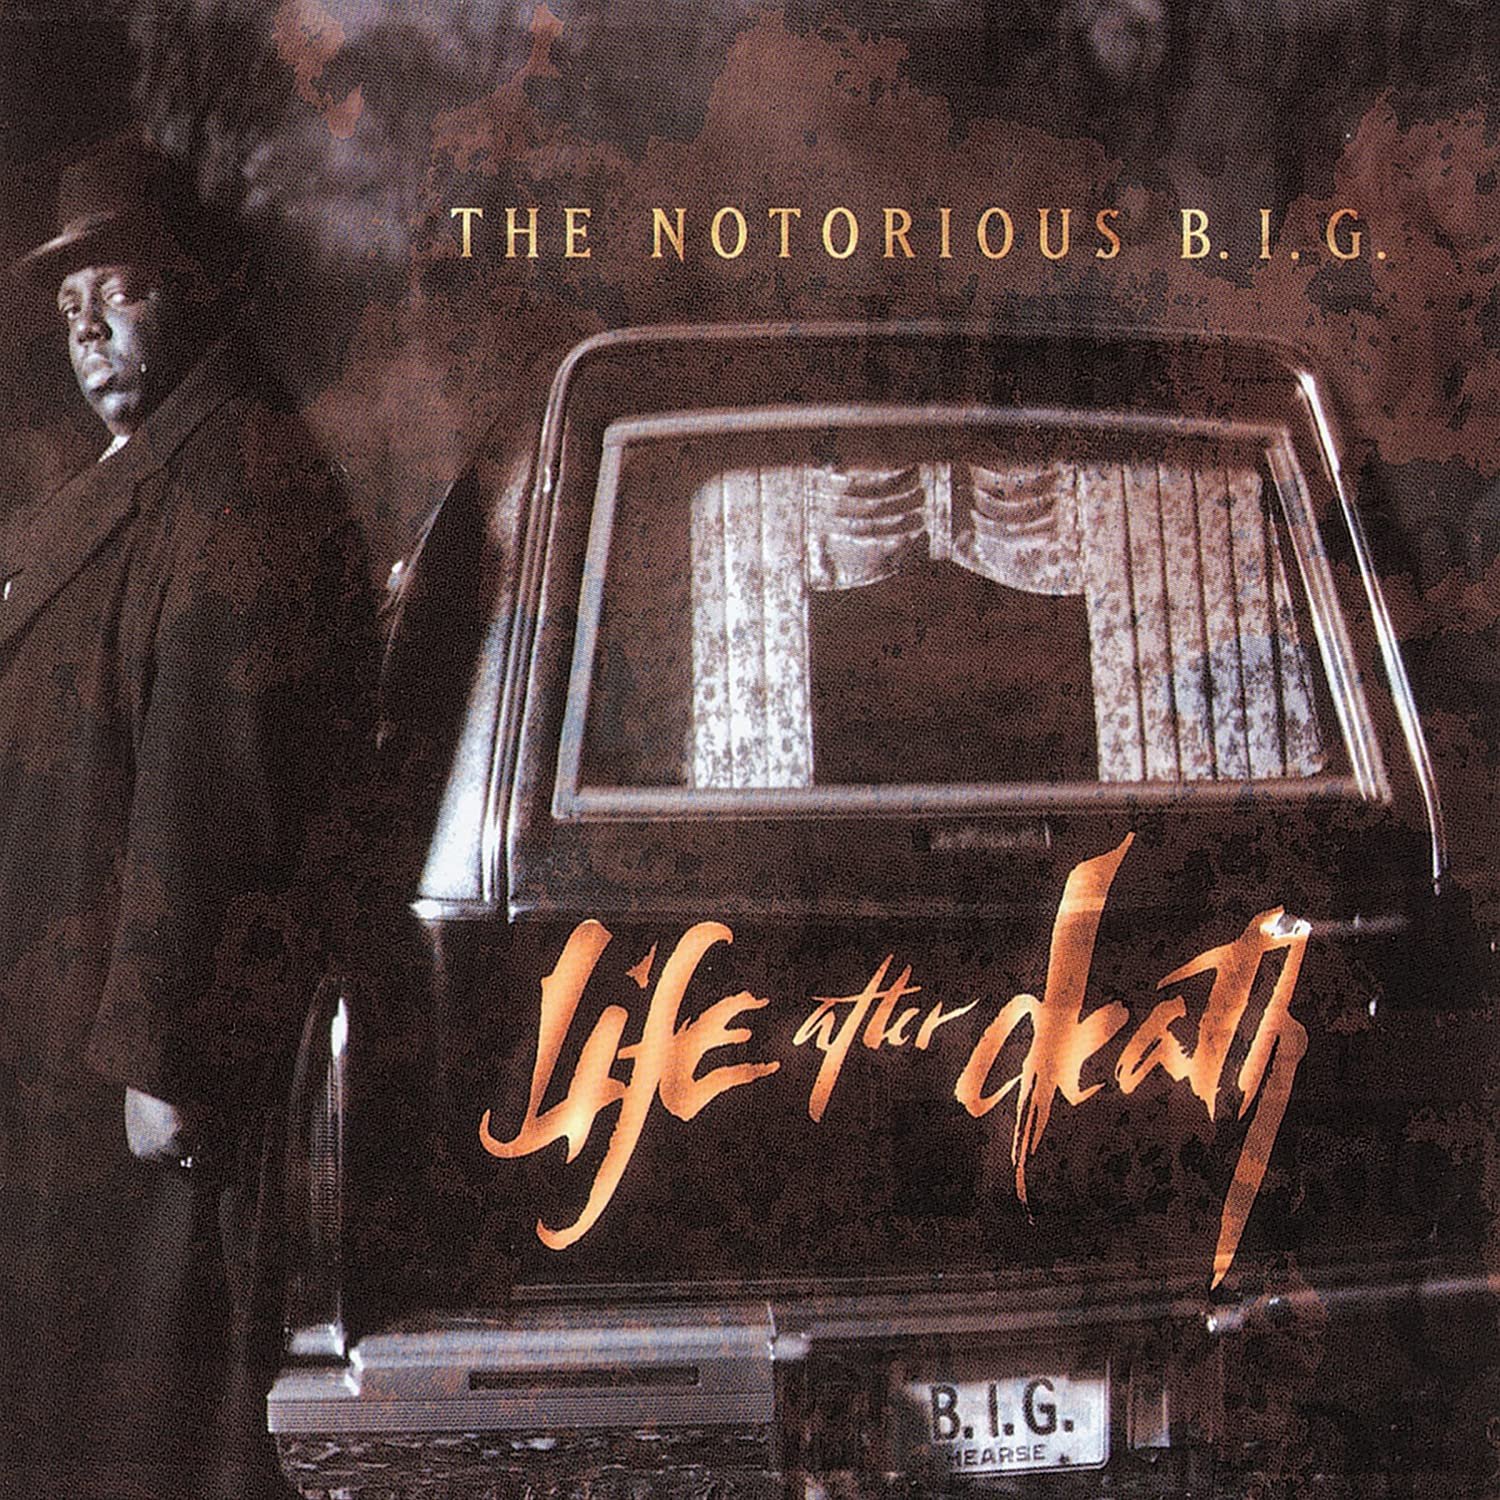 The Notorious B.I.G. - Mo Money Mo Problems (feat. Puff Daddy & Mase) - 2014 Remaster